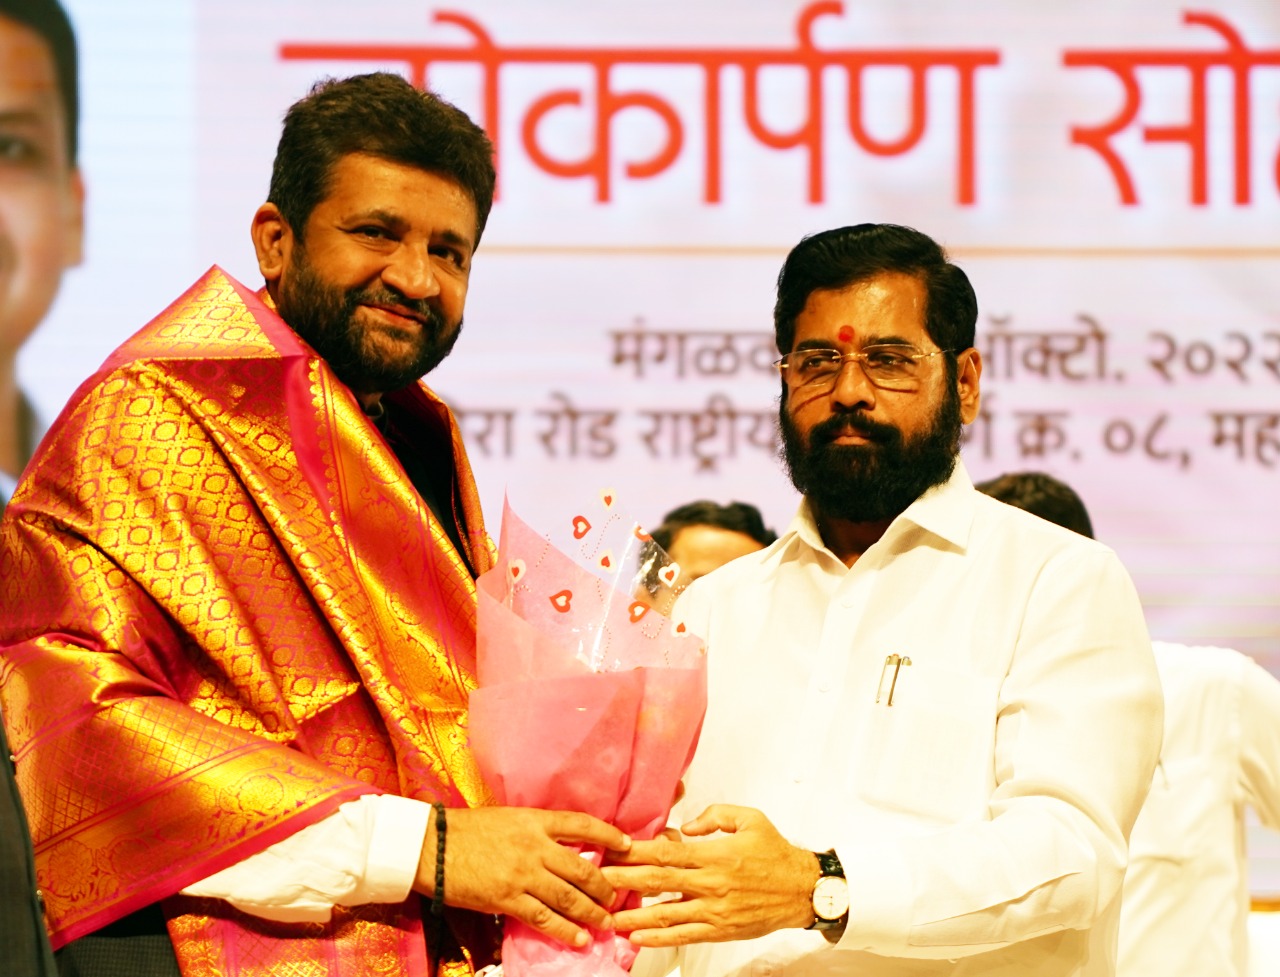 MICL Group constructed the largest auditorium in the western suburb; inaugurated by Hon’ble CM Eknath Shinde